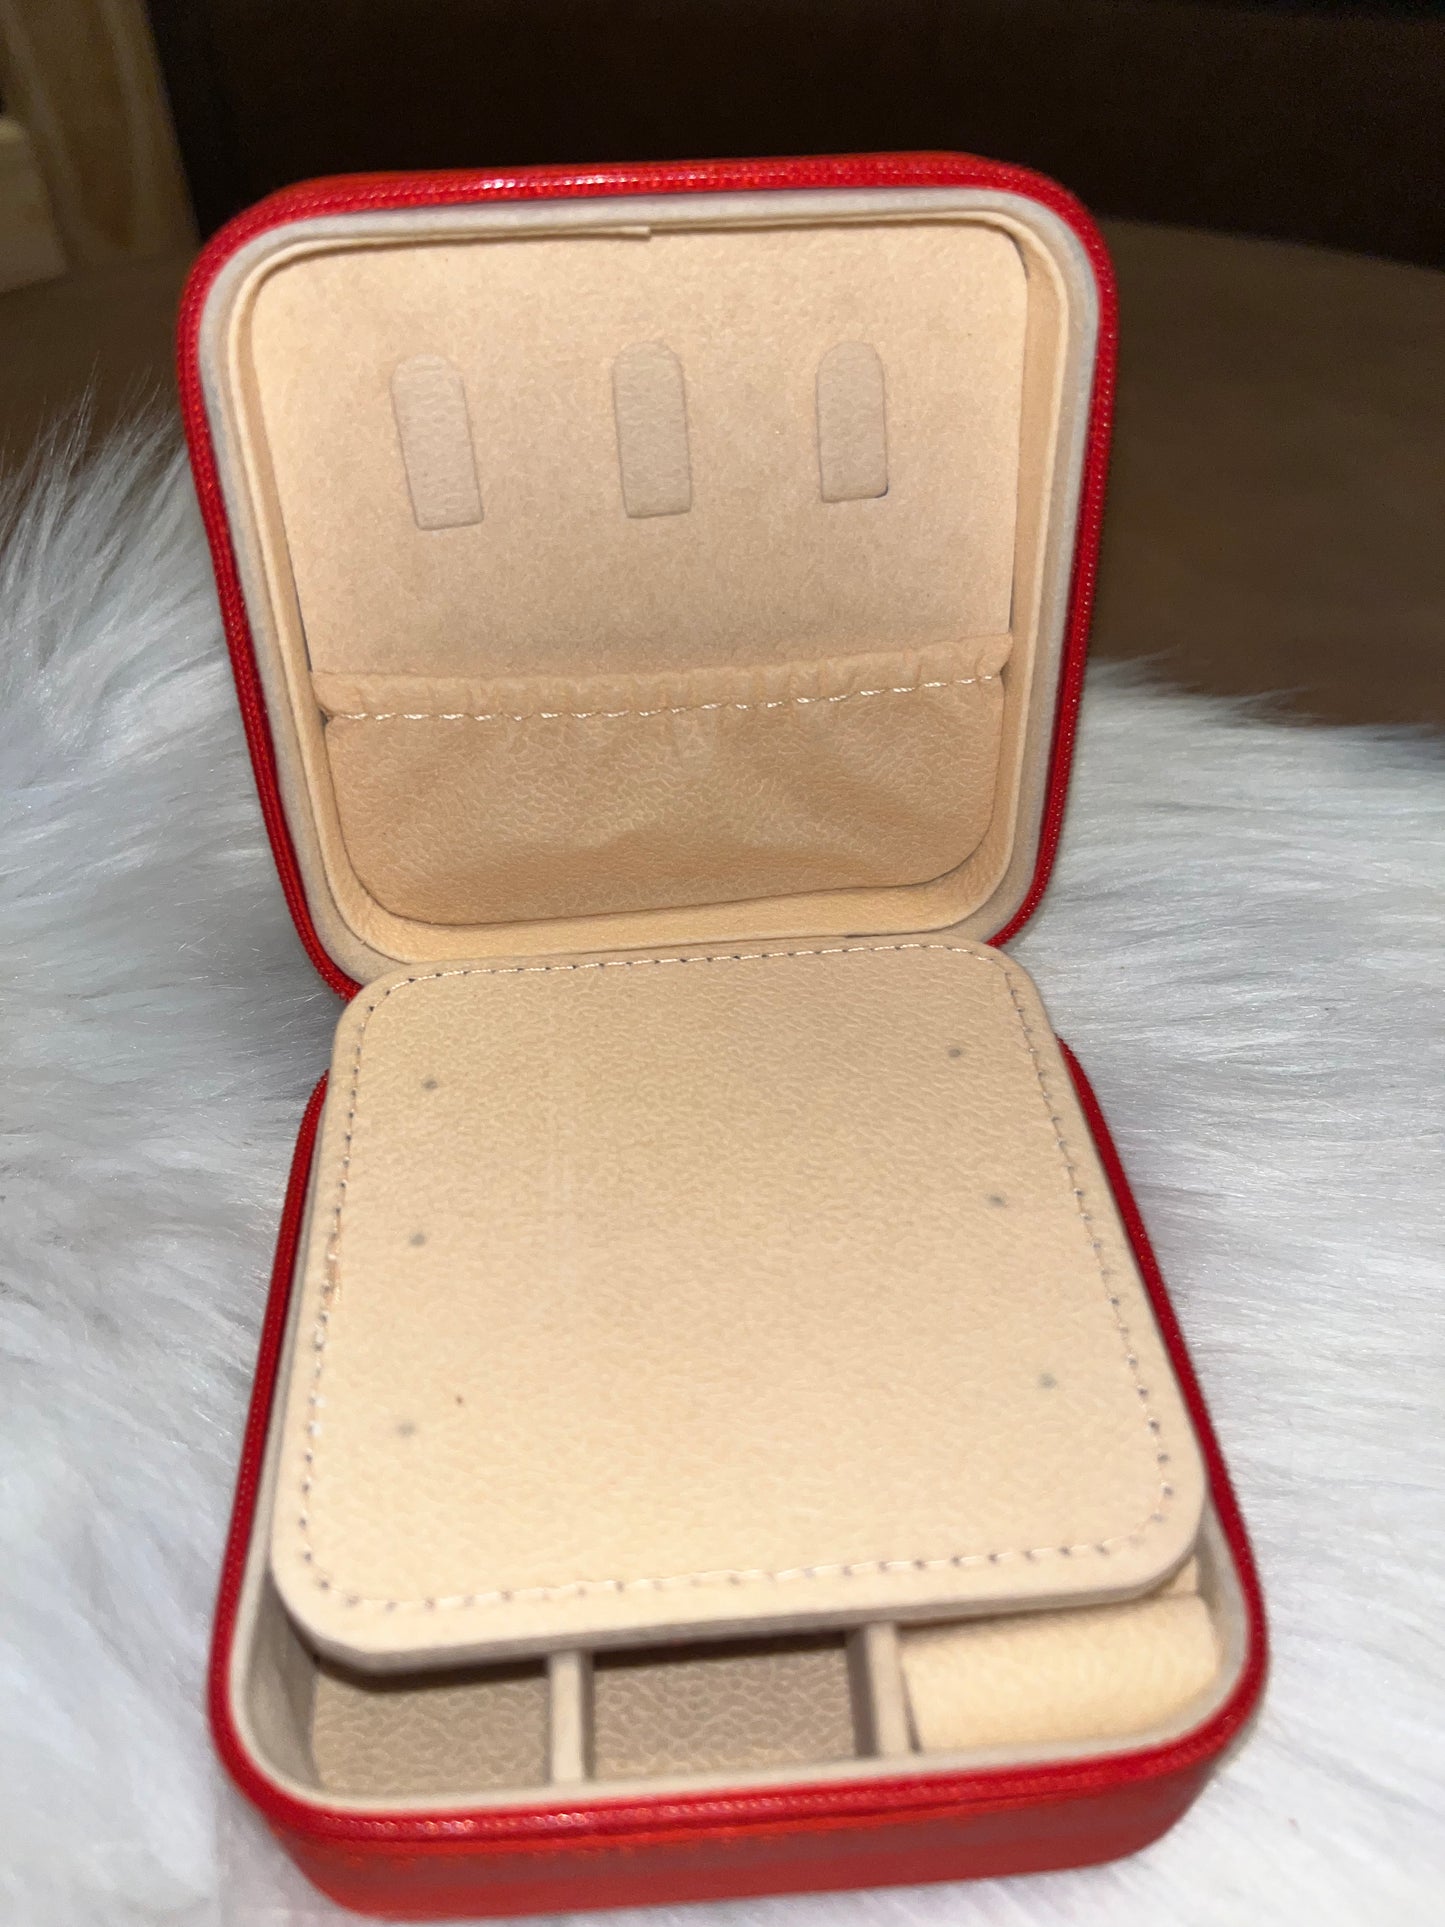 Red portable travel jewelry box with a compact mirror